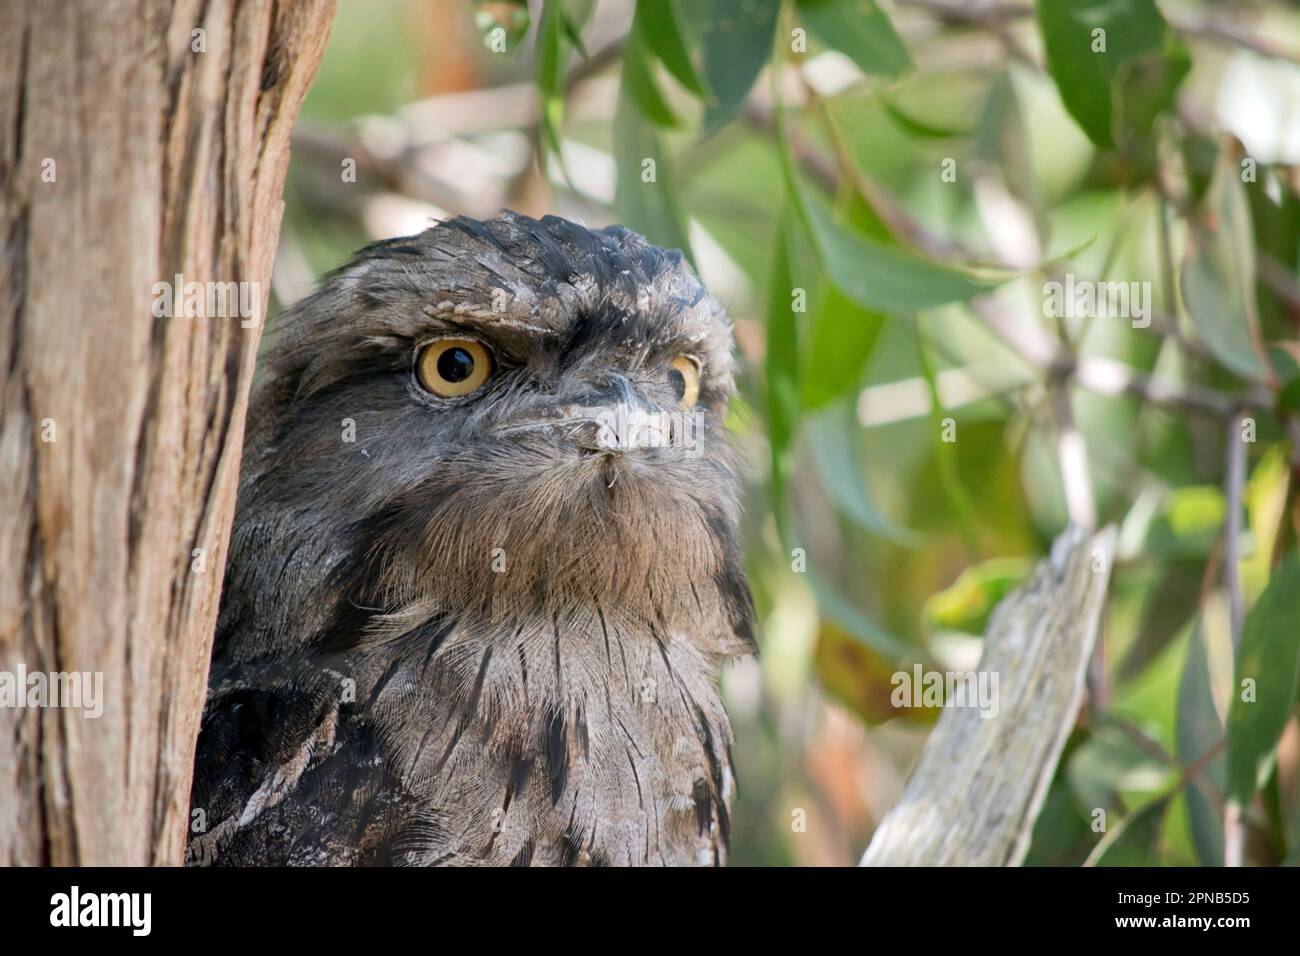 the tawny frogmouth has a mottled grey, white, black and rufous – the feather patterns help them mimic dead tree branches. Their feathers are soft, li Stock Photo